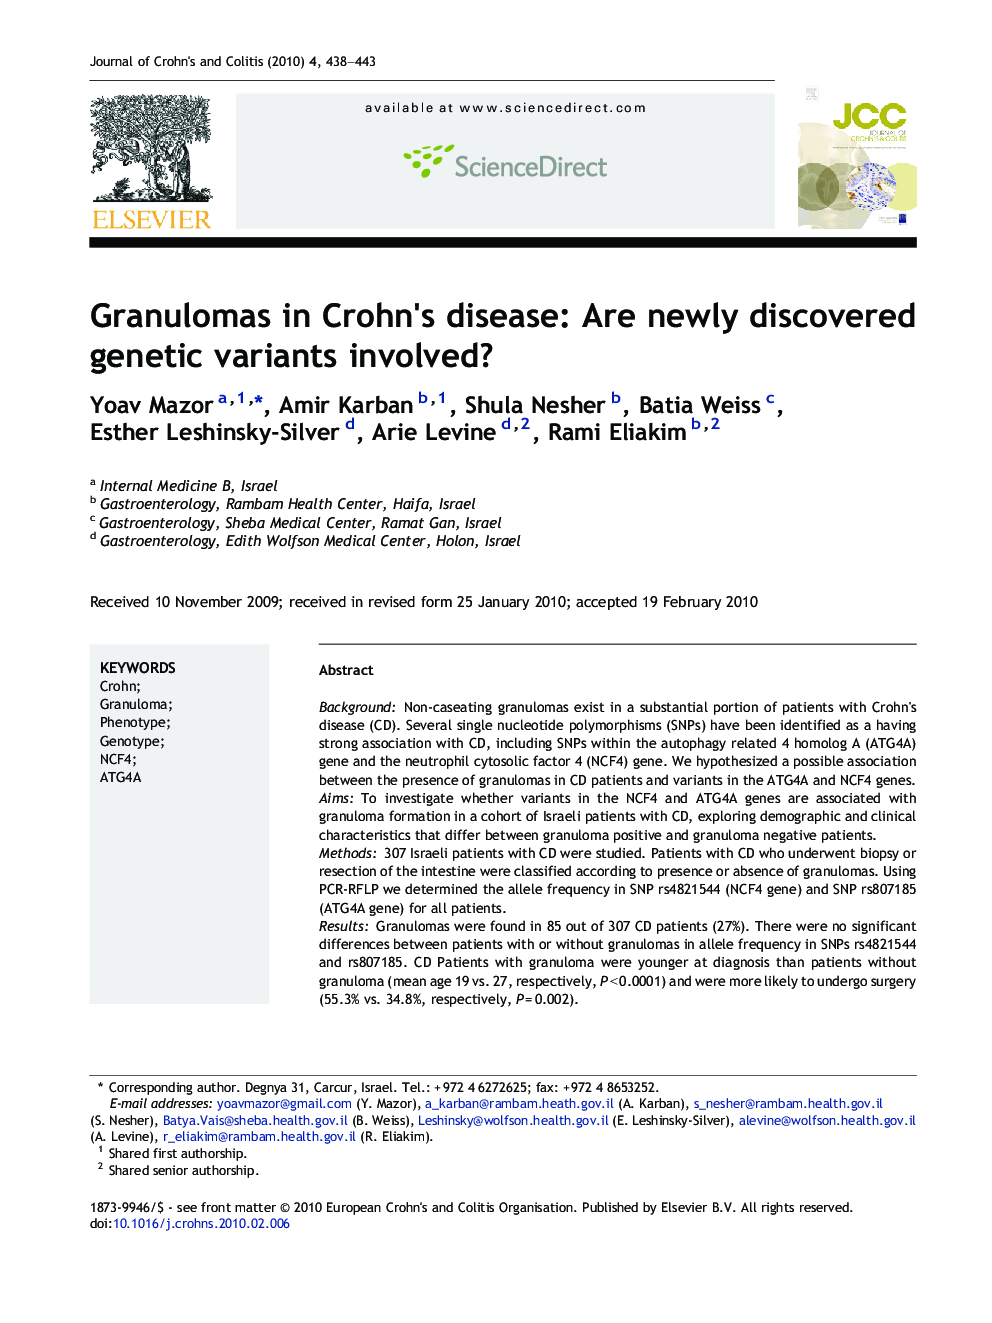 Granulomas in Crohn's disease: Are newly discovered genetic variants involved?